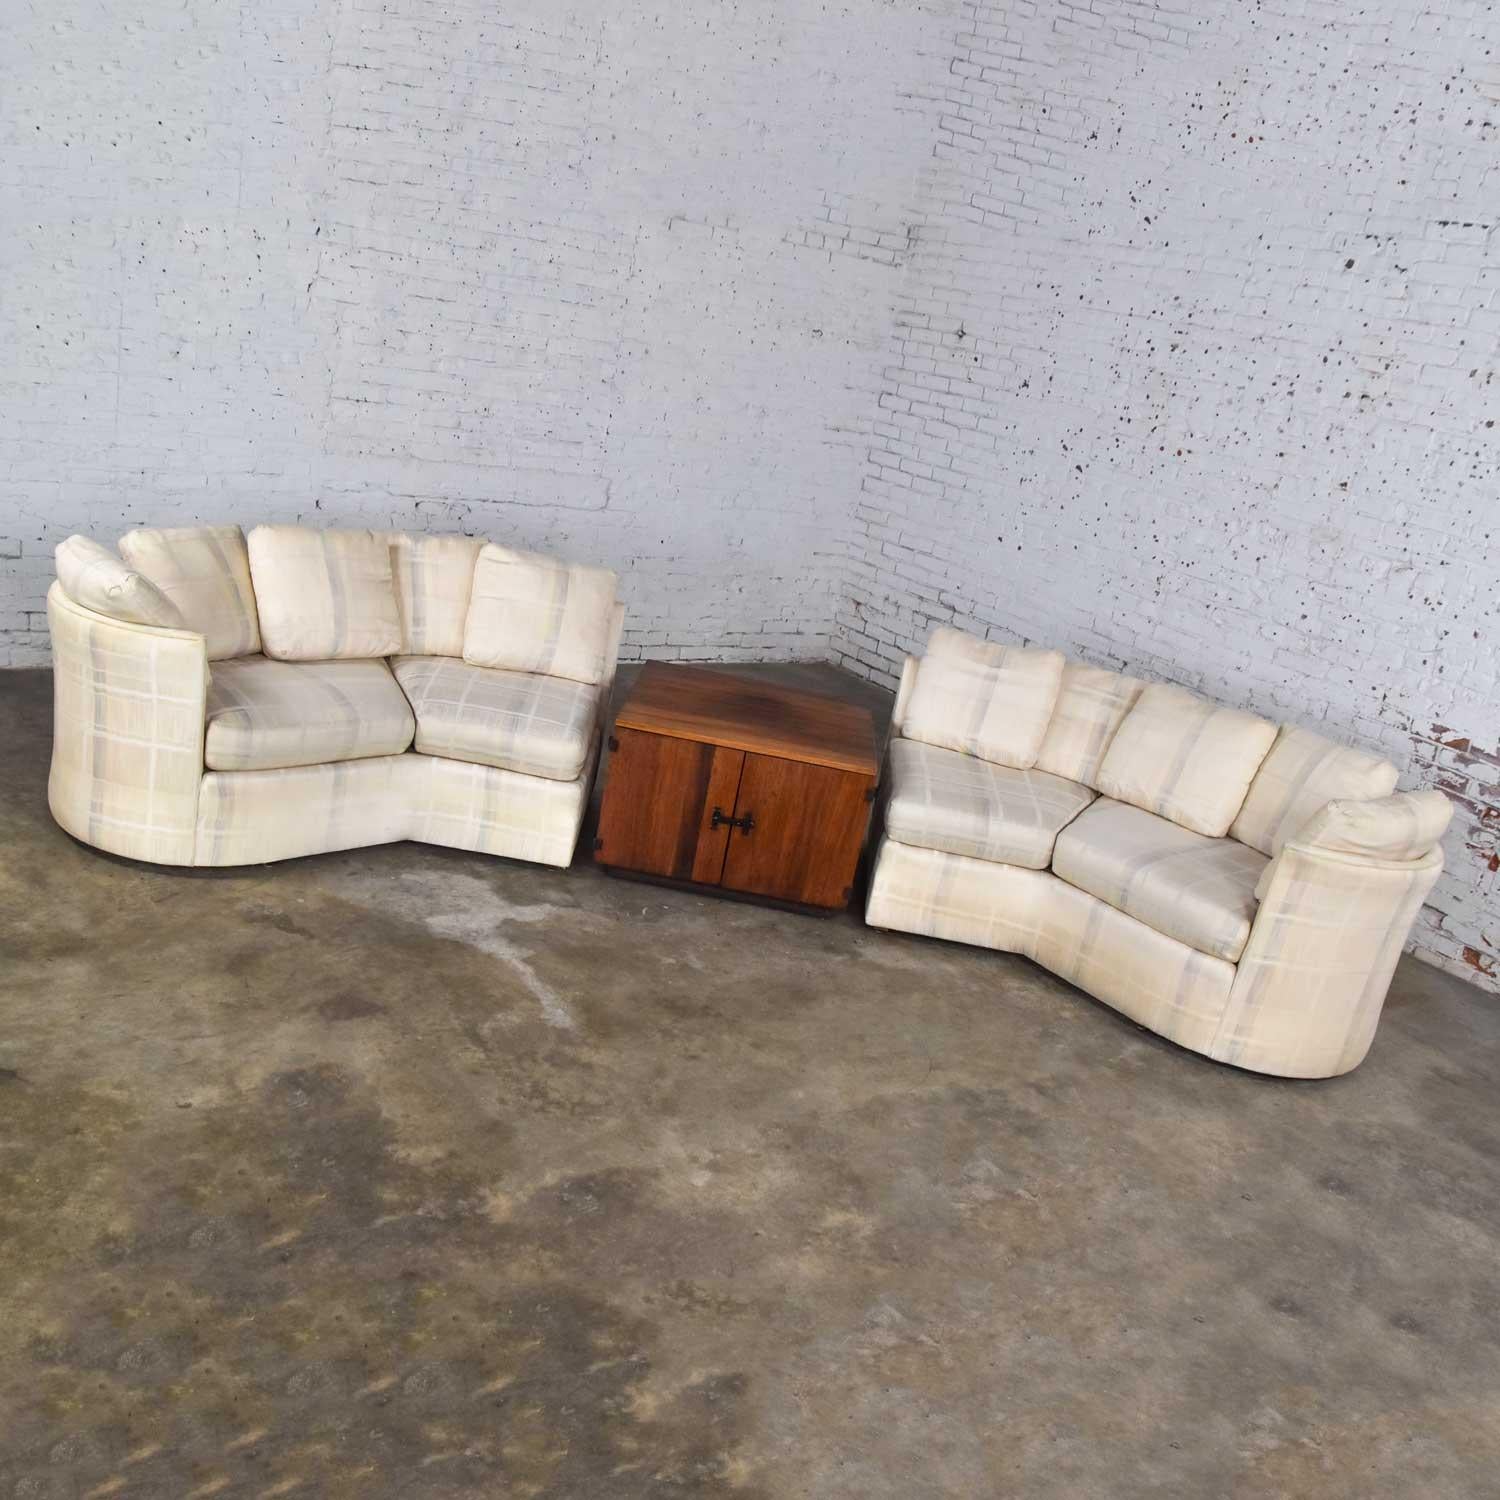 20th Century Vintage Modern or Art Deco Revival Two Piece Angled Sectional Sofa by Dansen